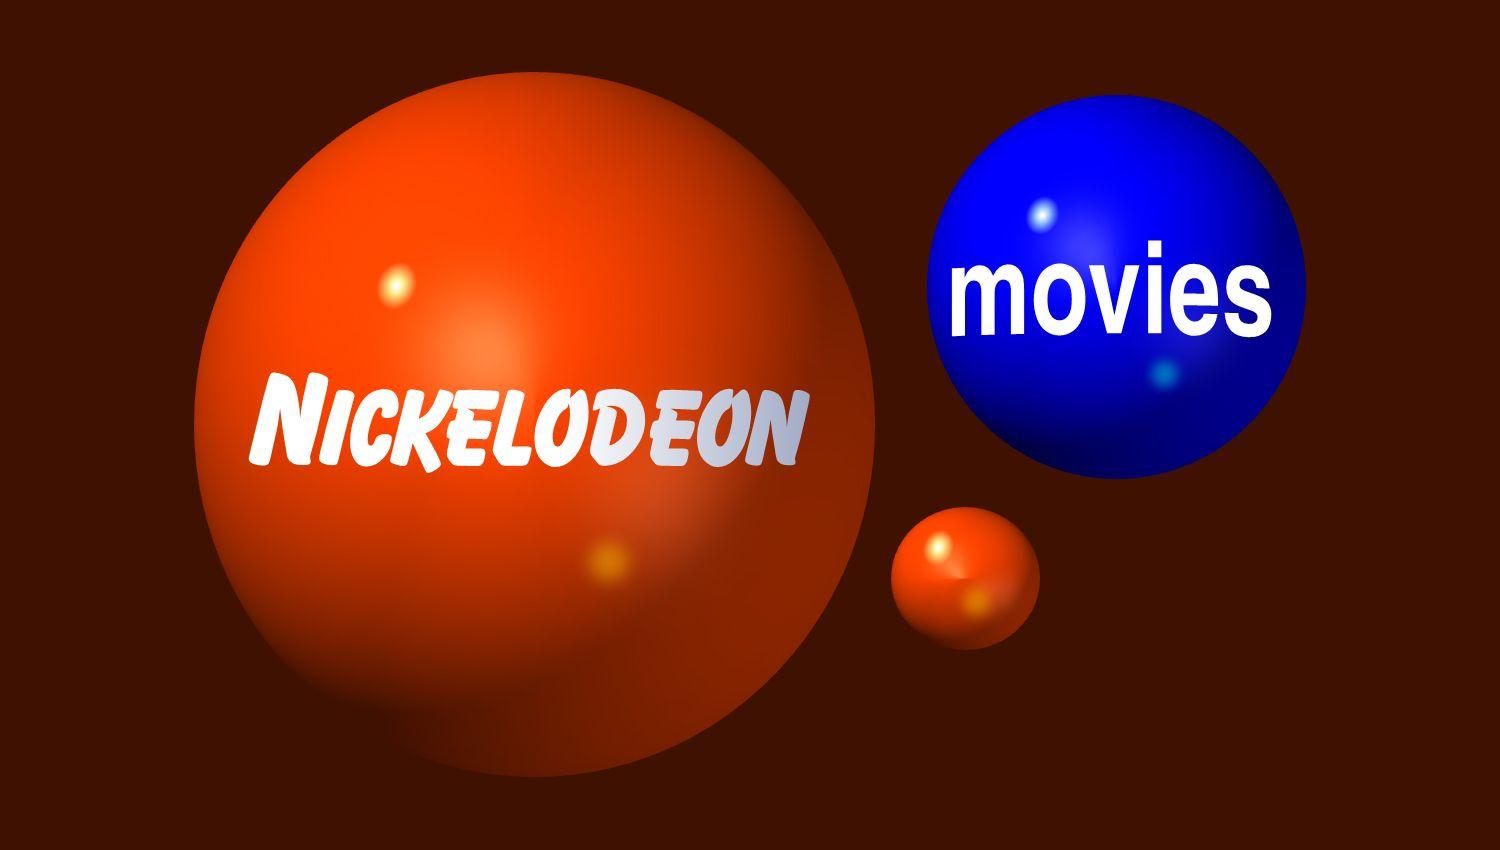 Orange Nickelodeon Logo - Nickelodeon Logo, Nickelodeon Symbol Meaning, History and Evolution